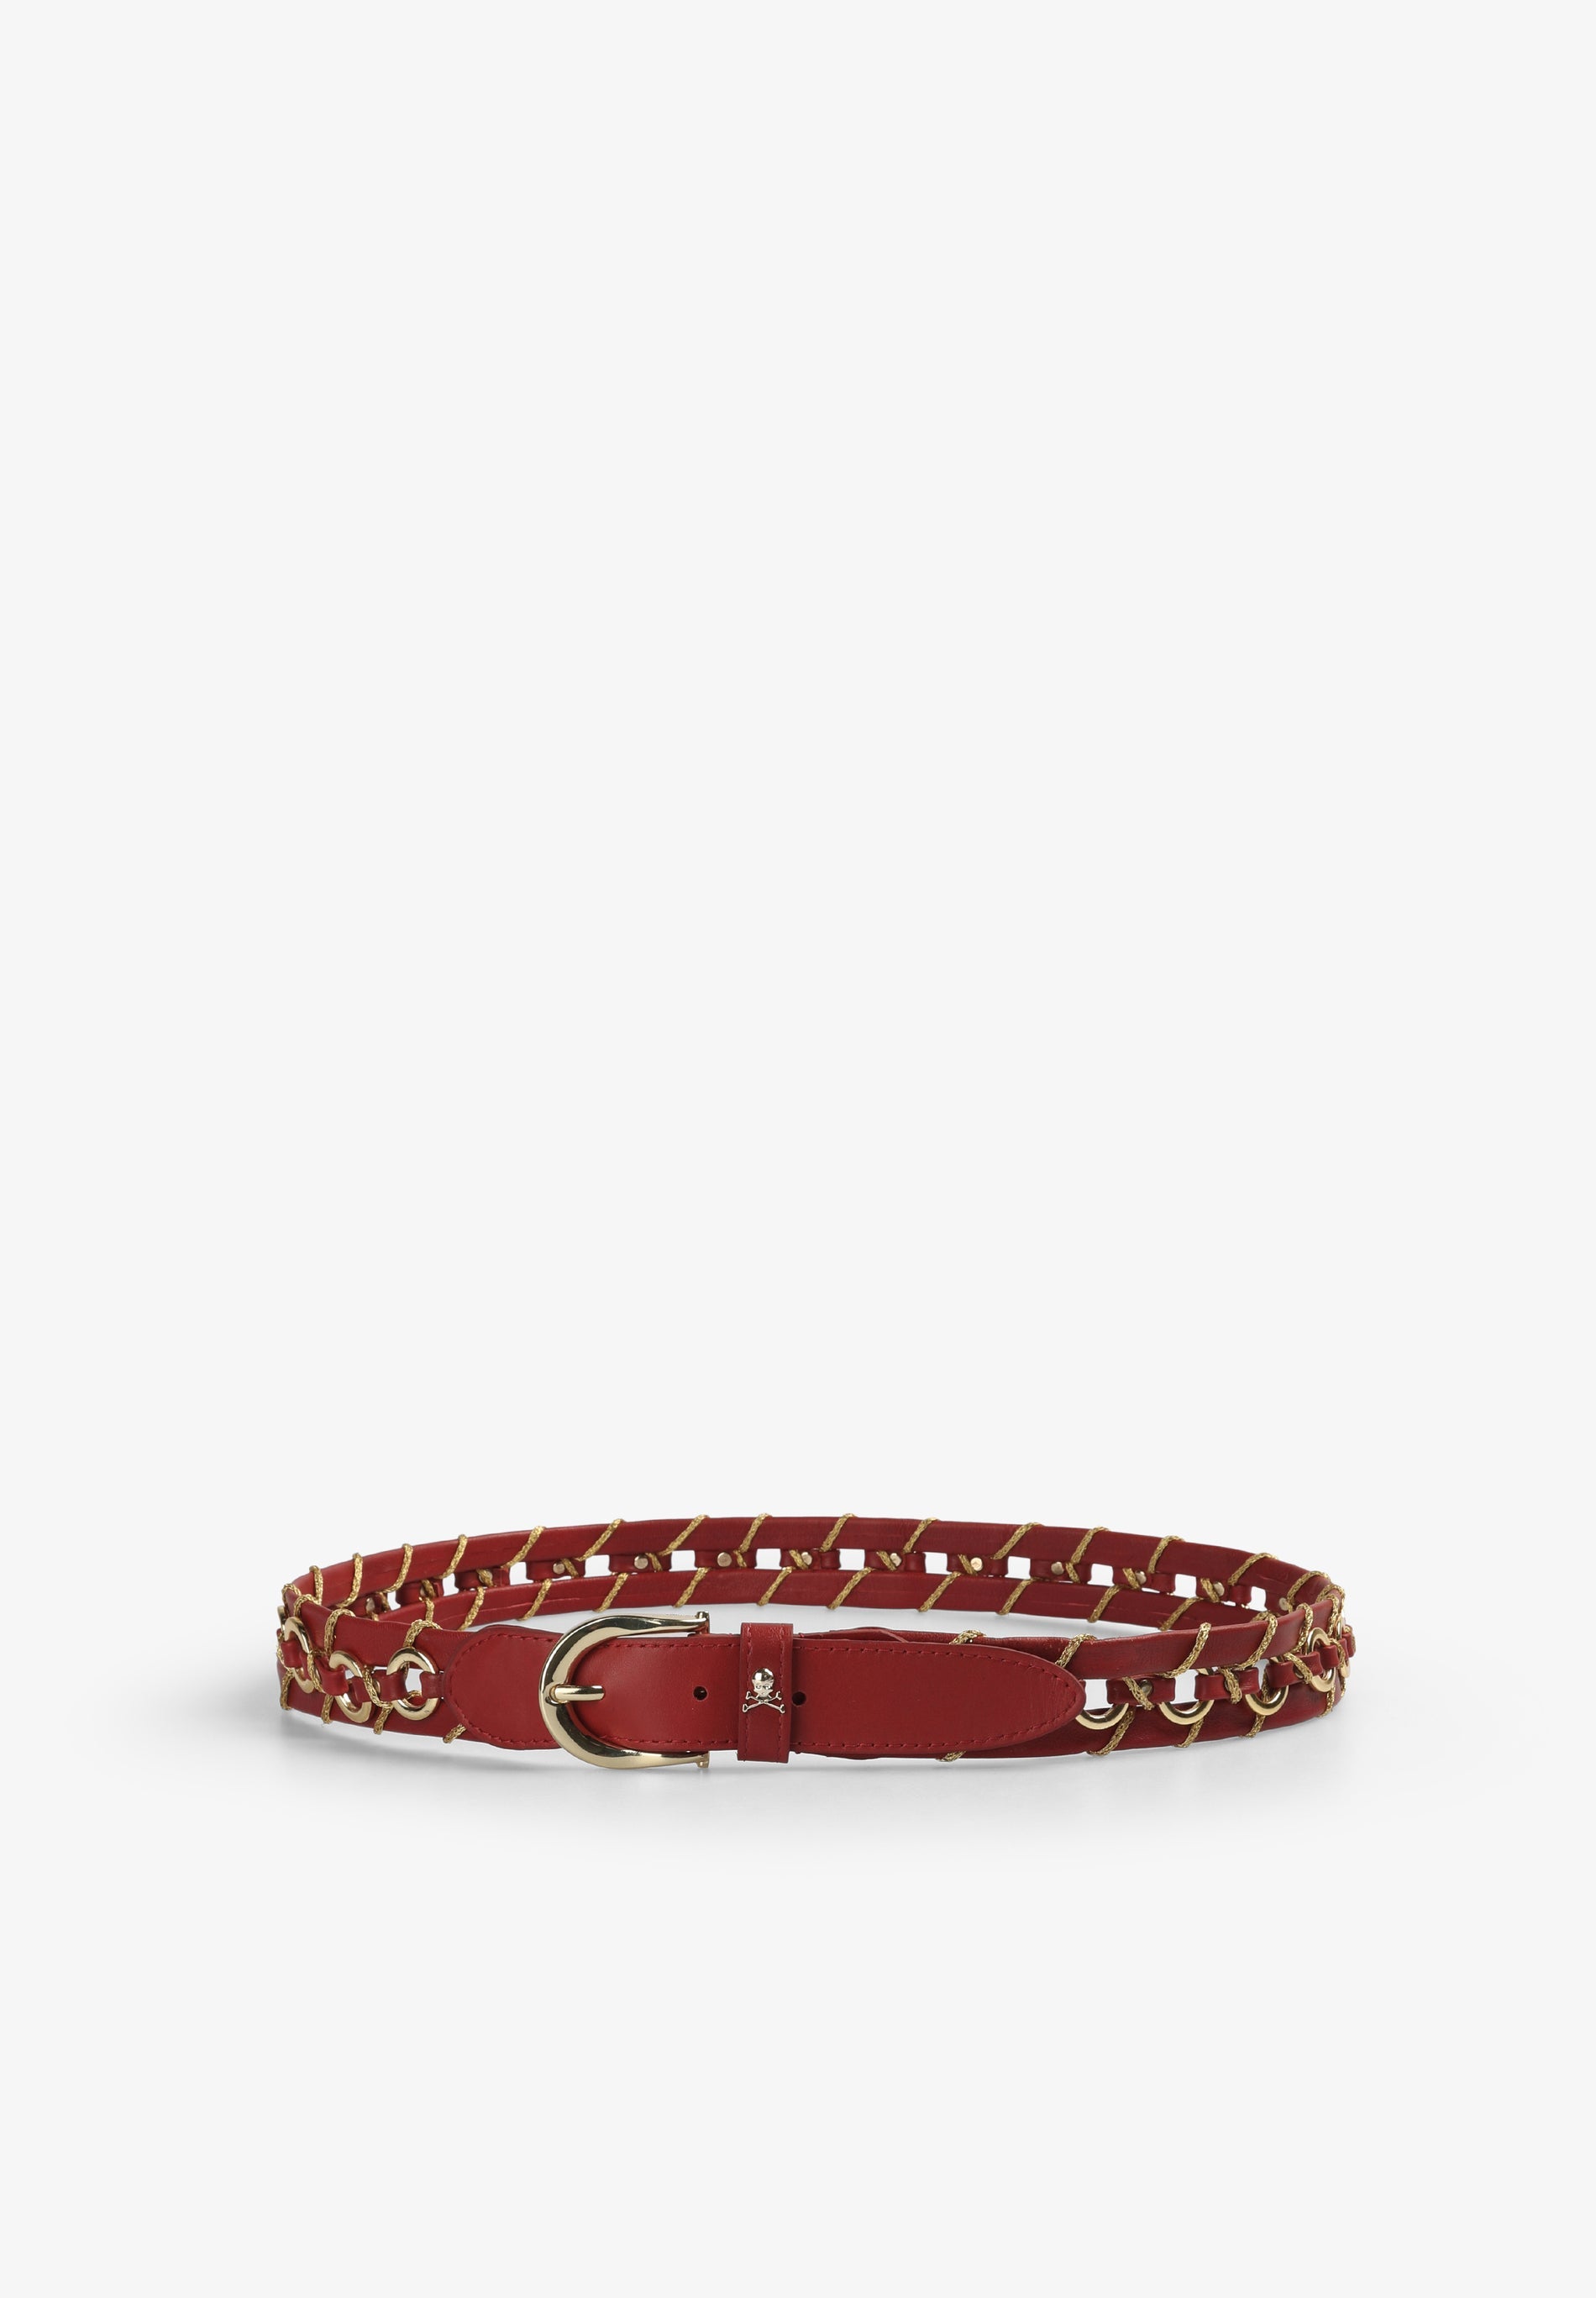 LEATHER BELT WITH EYELETS AND GOLDEN THREAD DETAIL